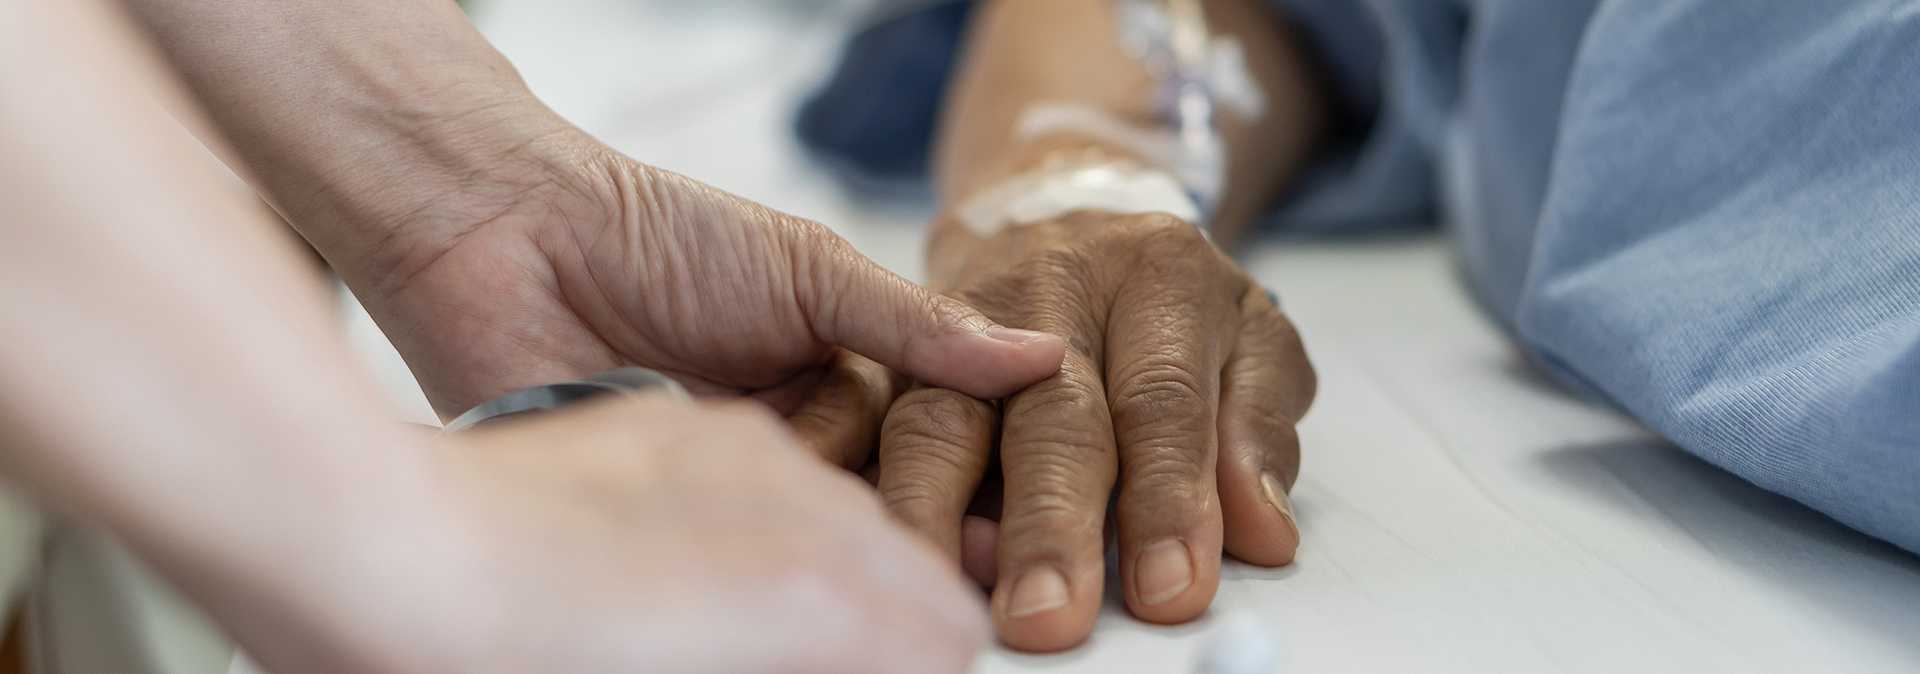 The hands of a young nurse holding those of a older person